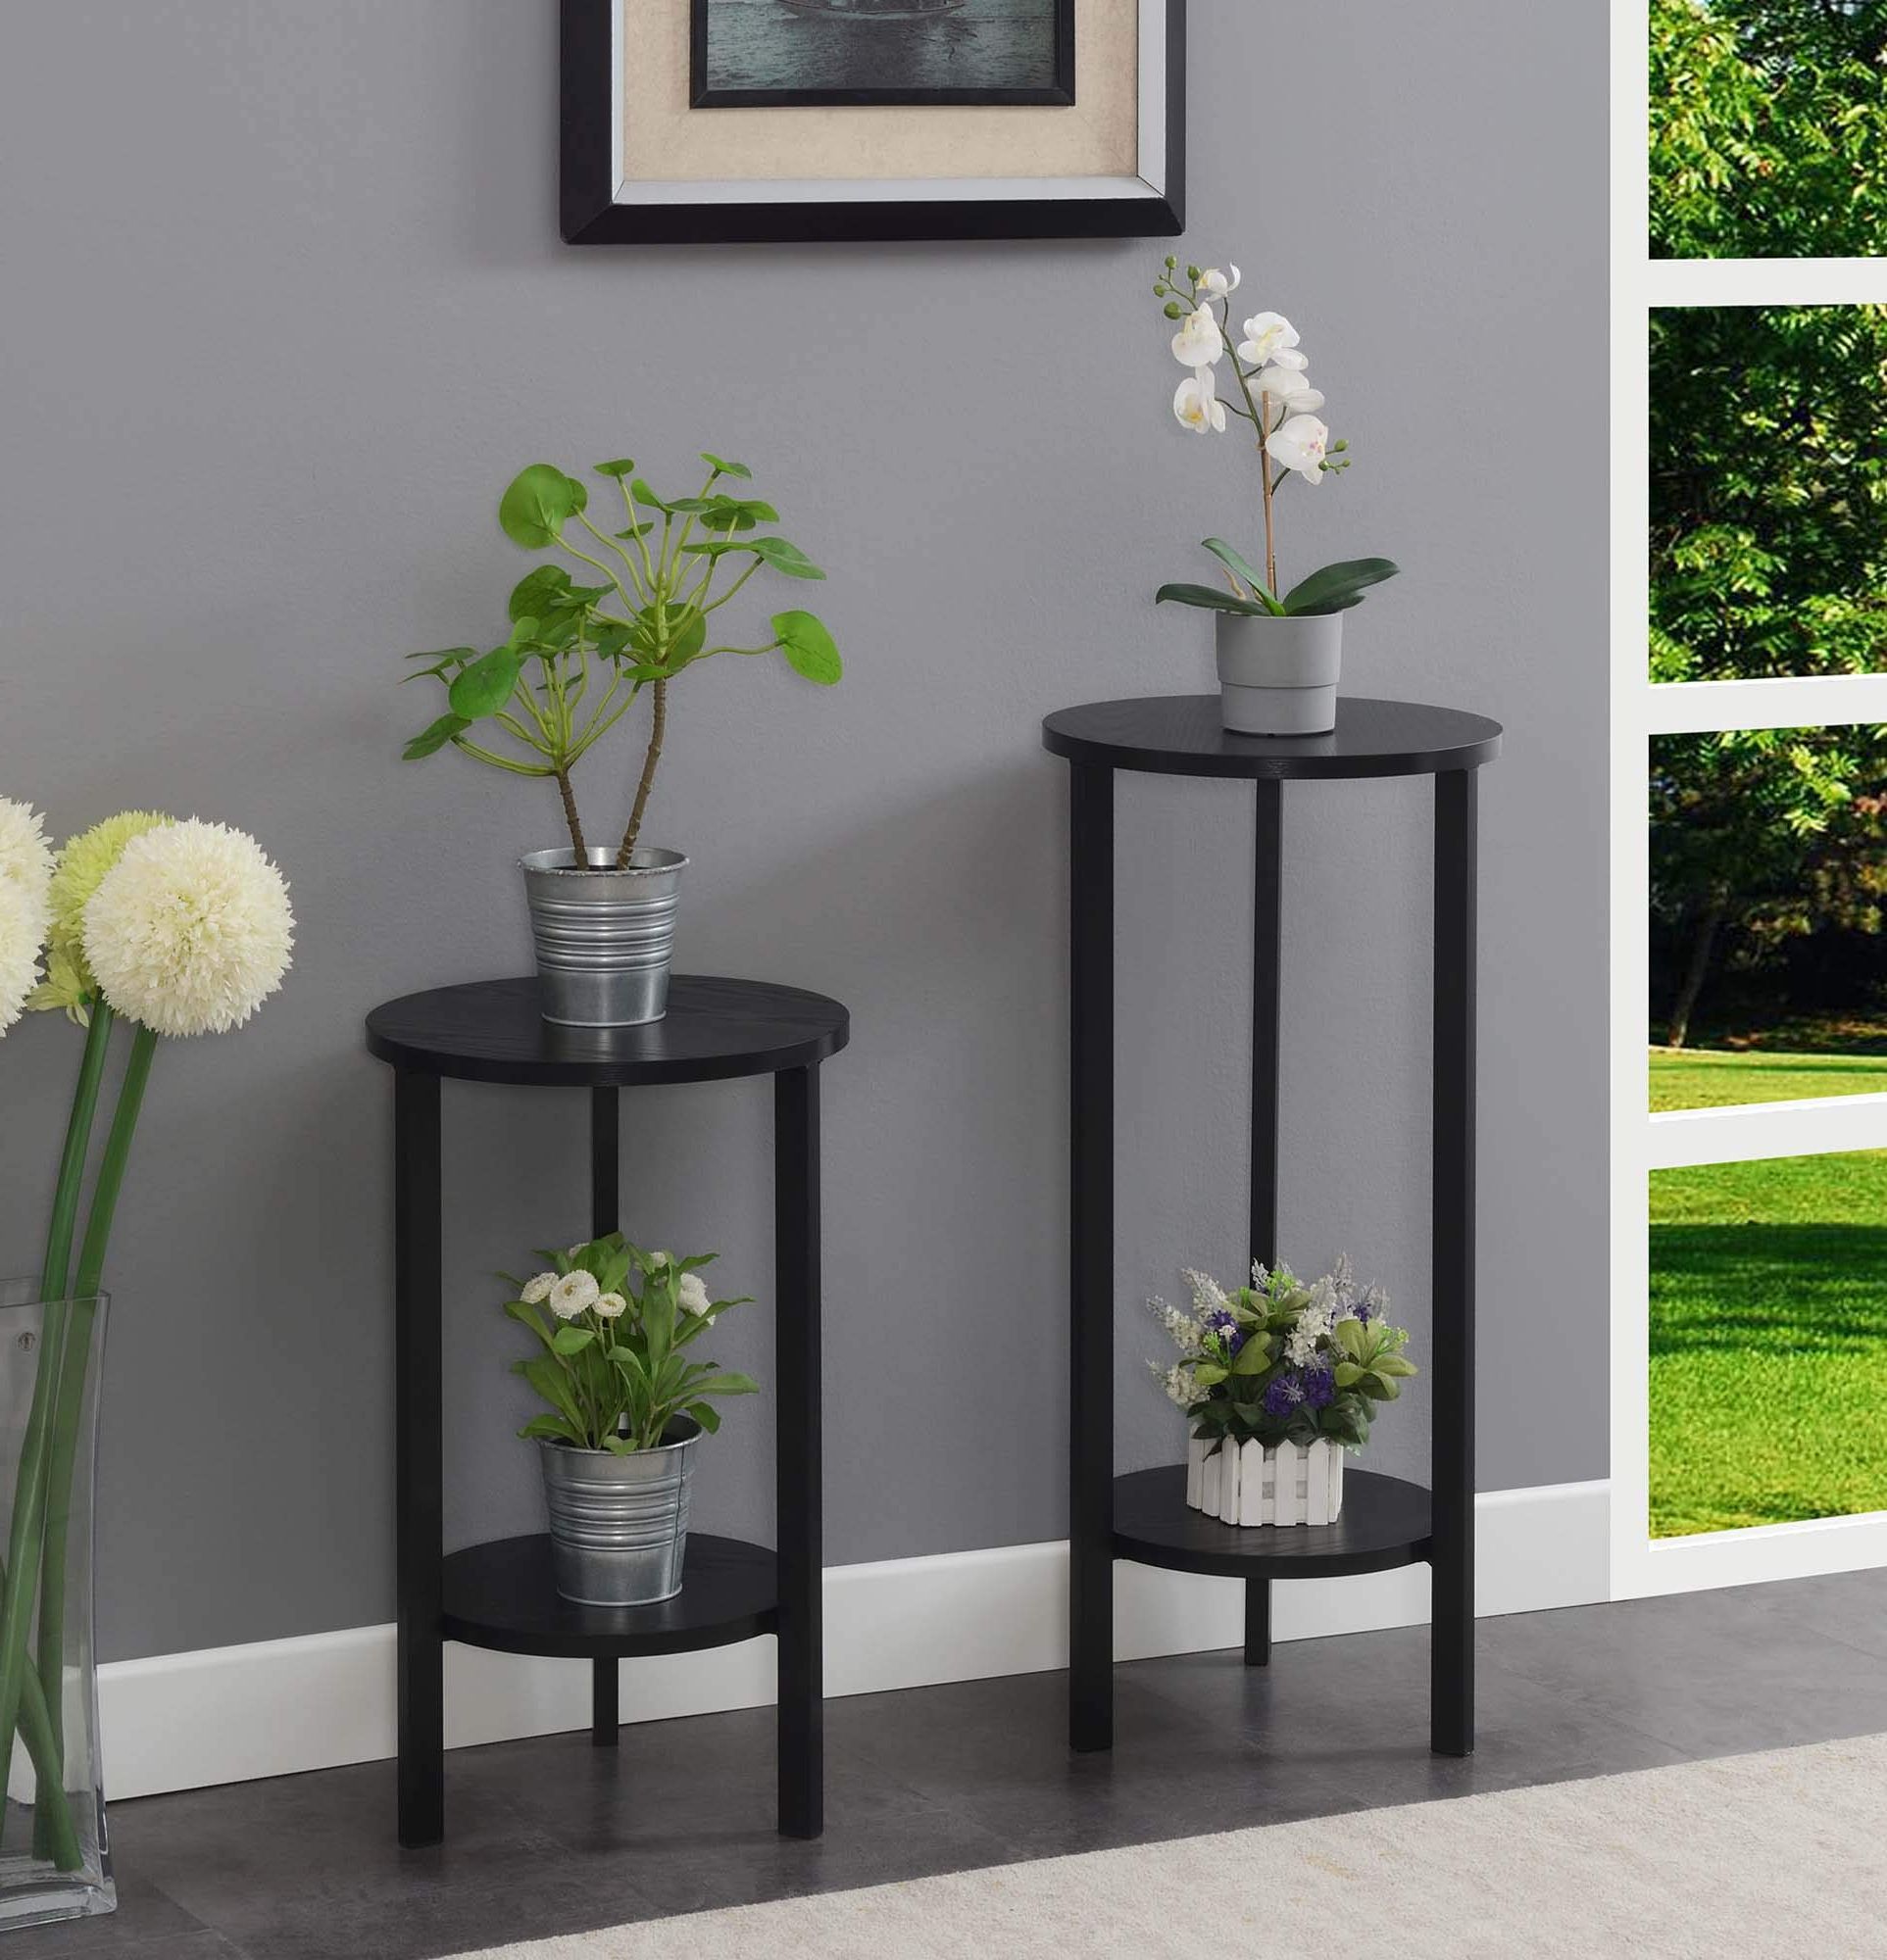 Preferred Greystone Plant Stands Pertaining To Convenience Concepts Graystone 2 Tier Plant Stand, 31", Black/black (View 2 of 10)